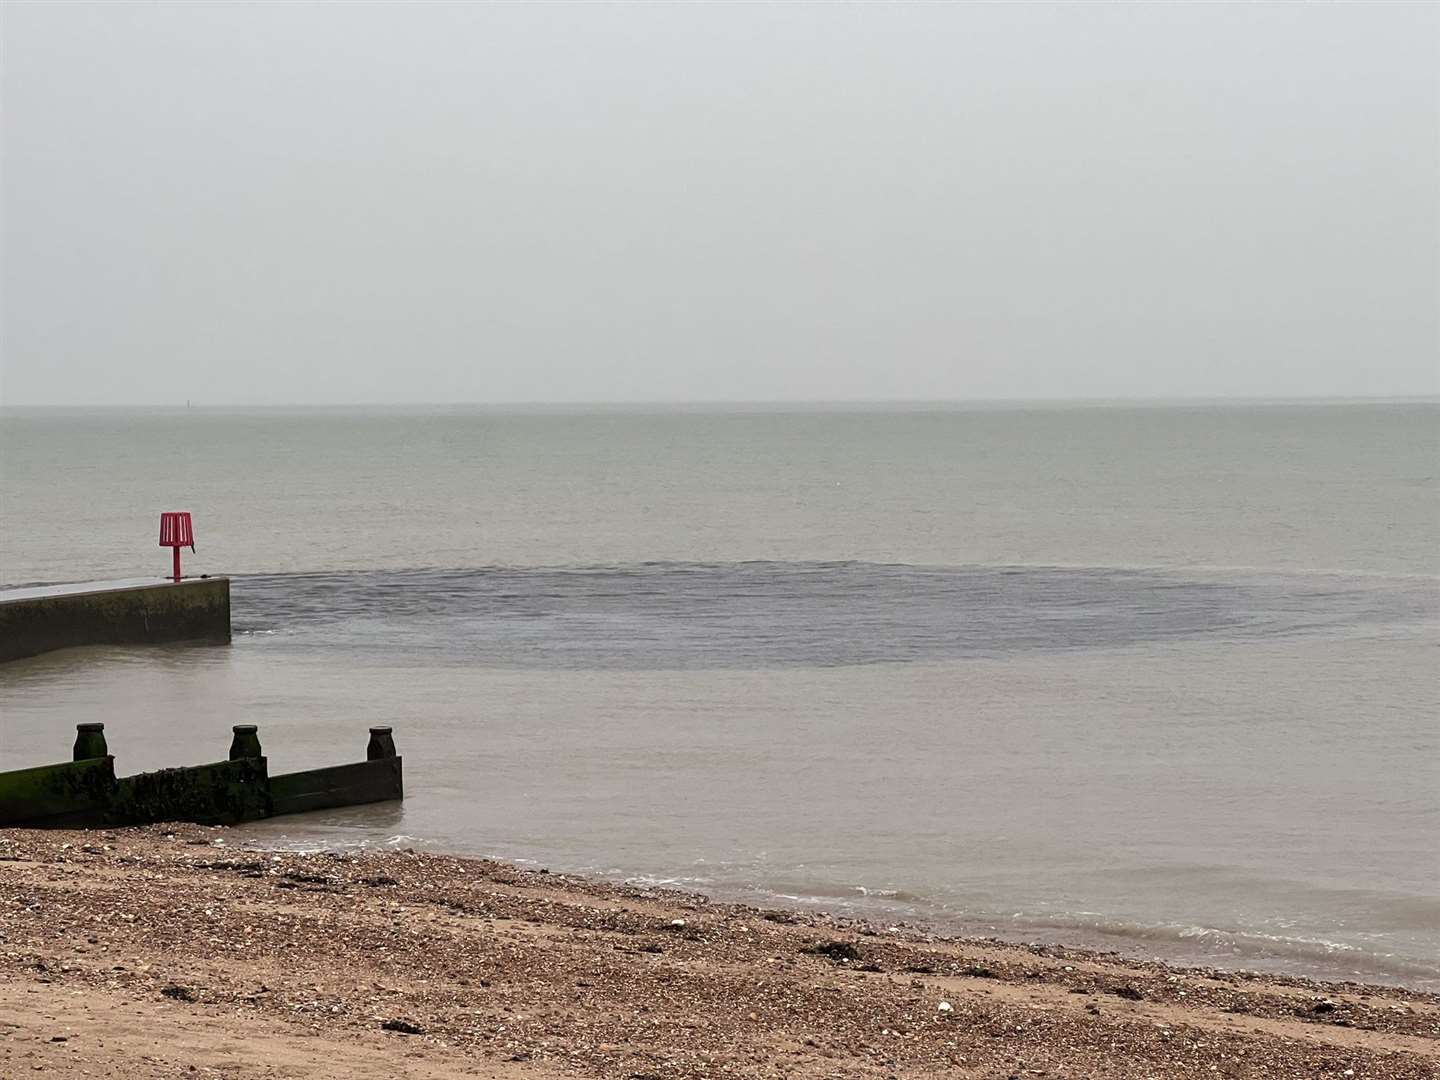 Storm sewage has been released at West Beach in Whitstable, similar to a previous release pictured. Image: David Cramphorn